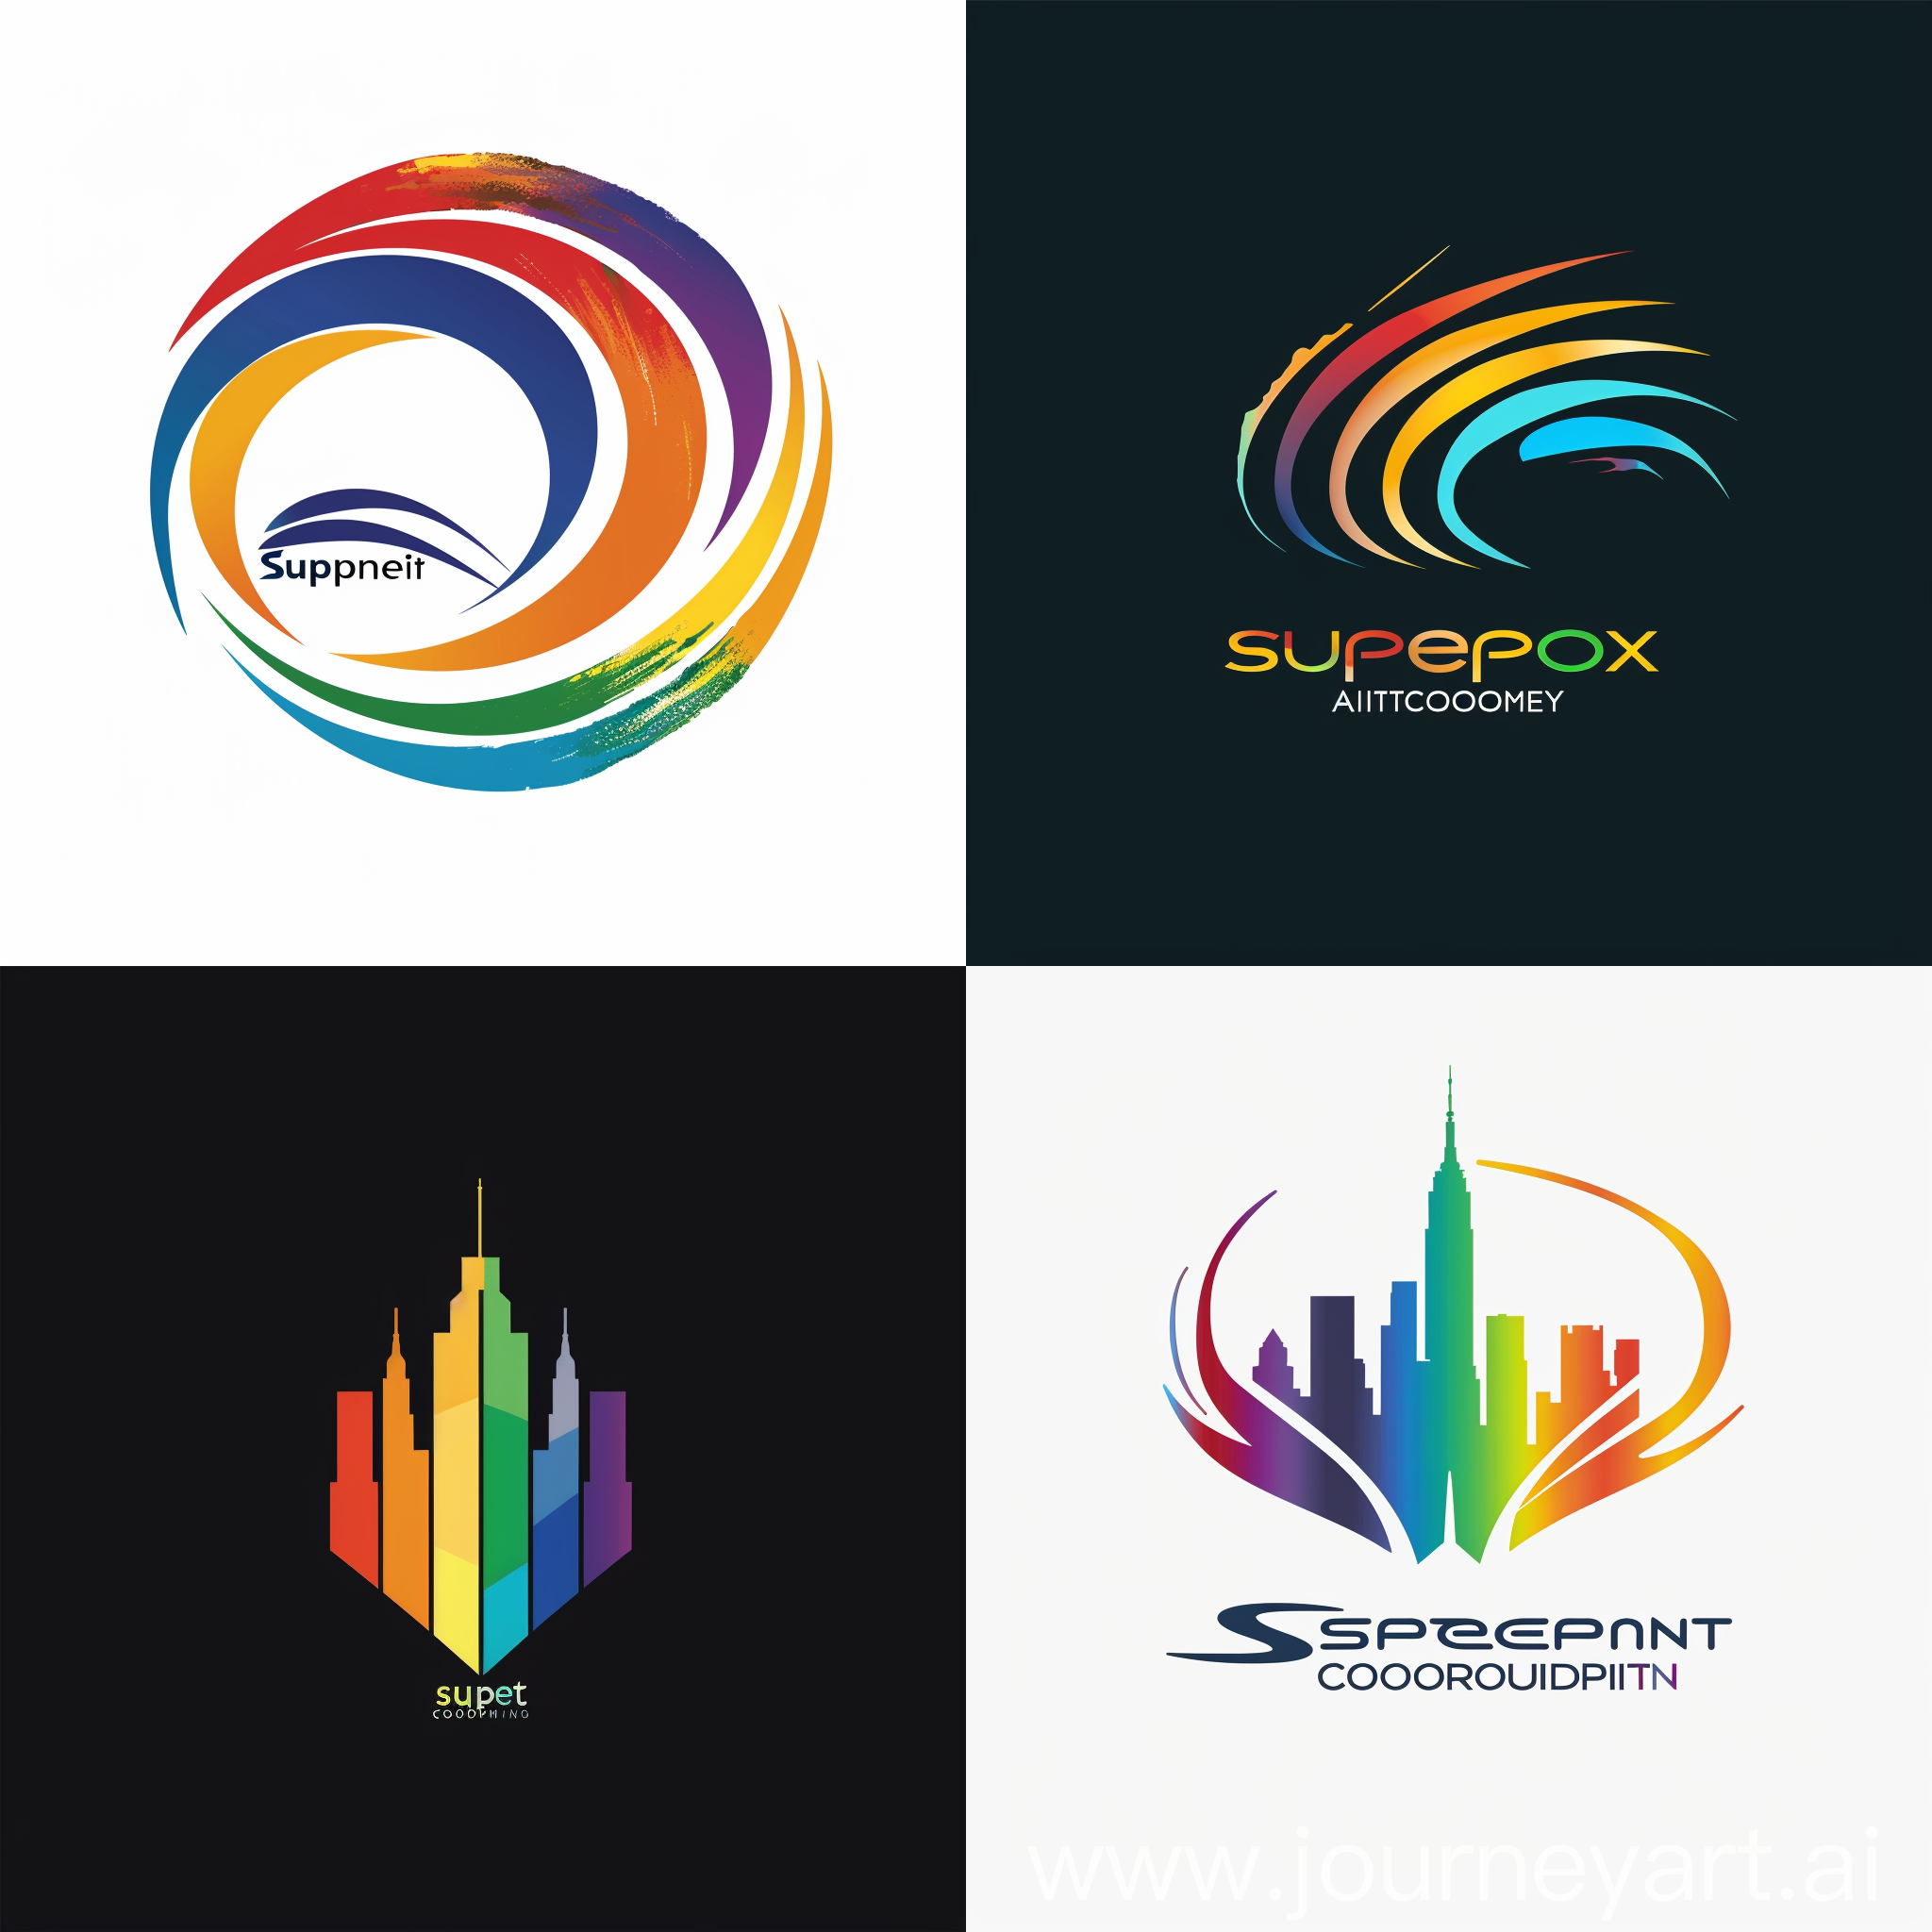 Create a logo for a commercial painting company based in NYC. The company name is Spectrum Painting Corporation